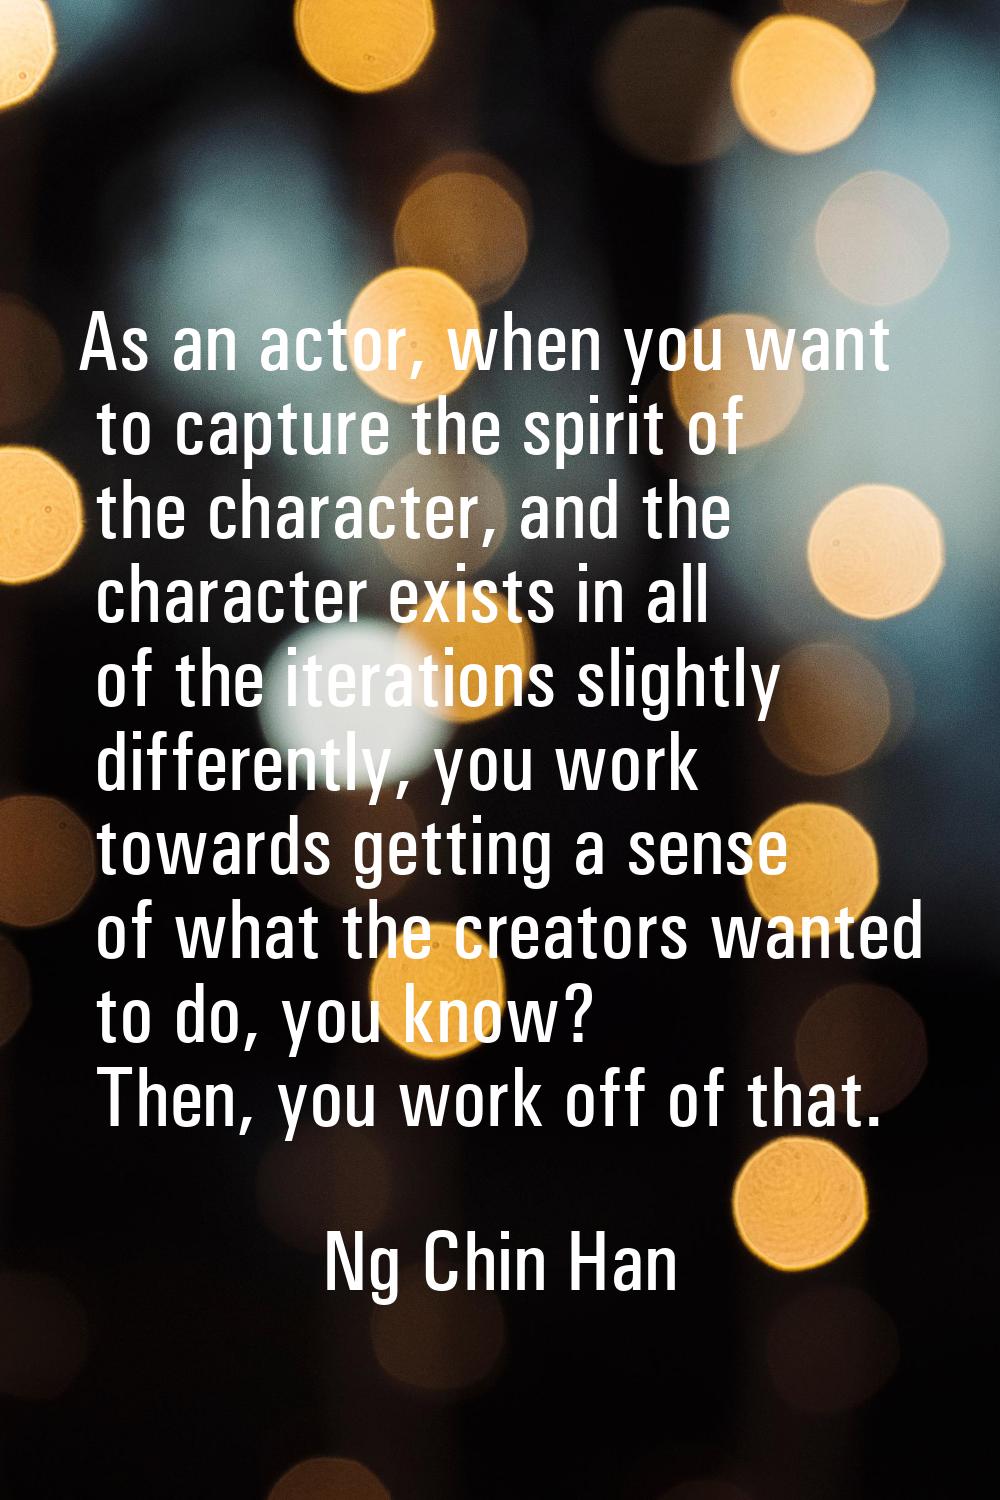 As an actor, when you want to capture the spirit of the character, and the character exists in all 